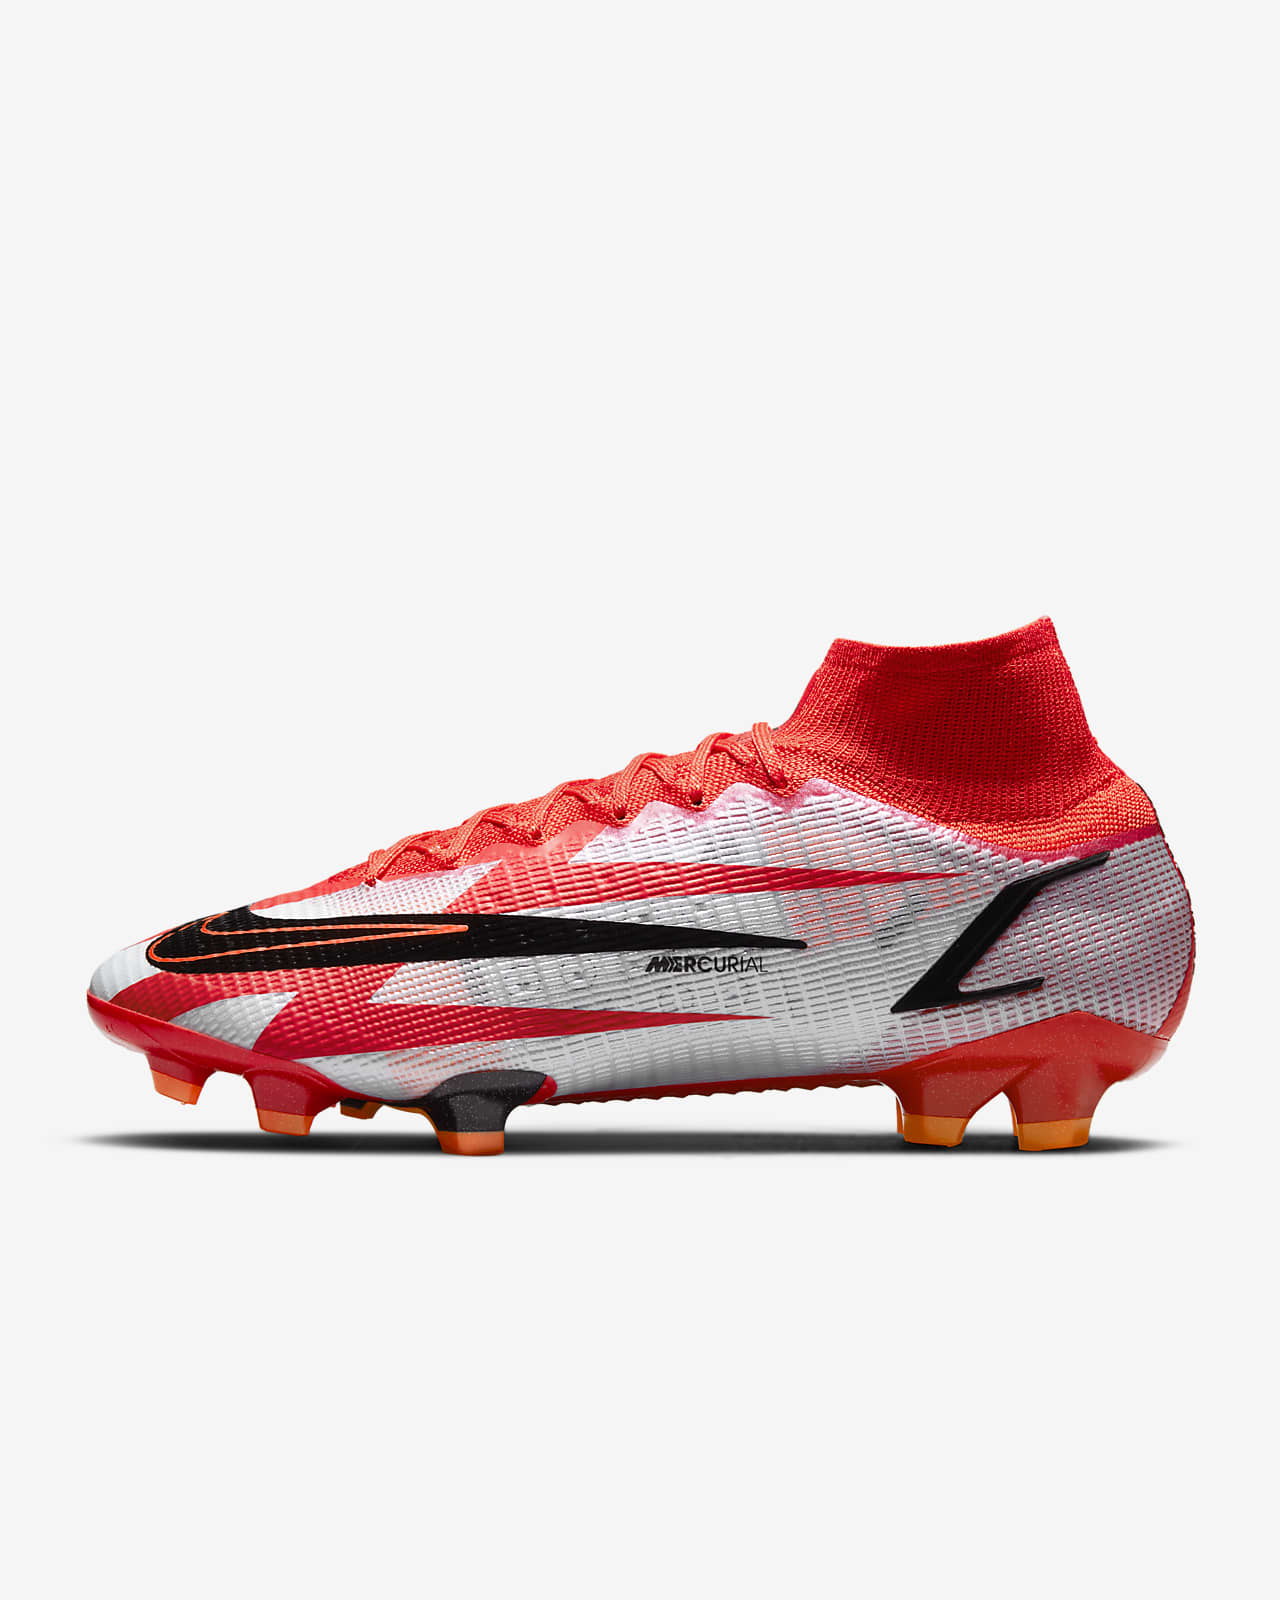 Nike Mercurial Superfly CR7 FG Firm-Ground Soccer Cleats.